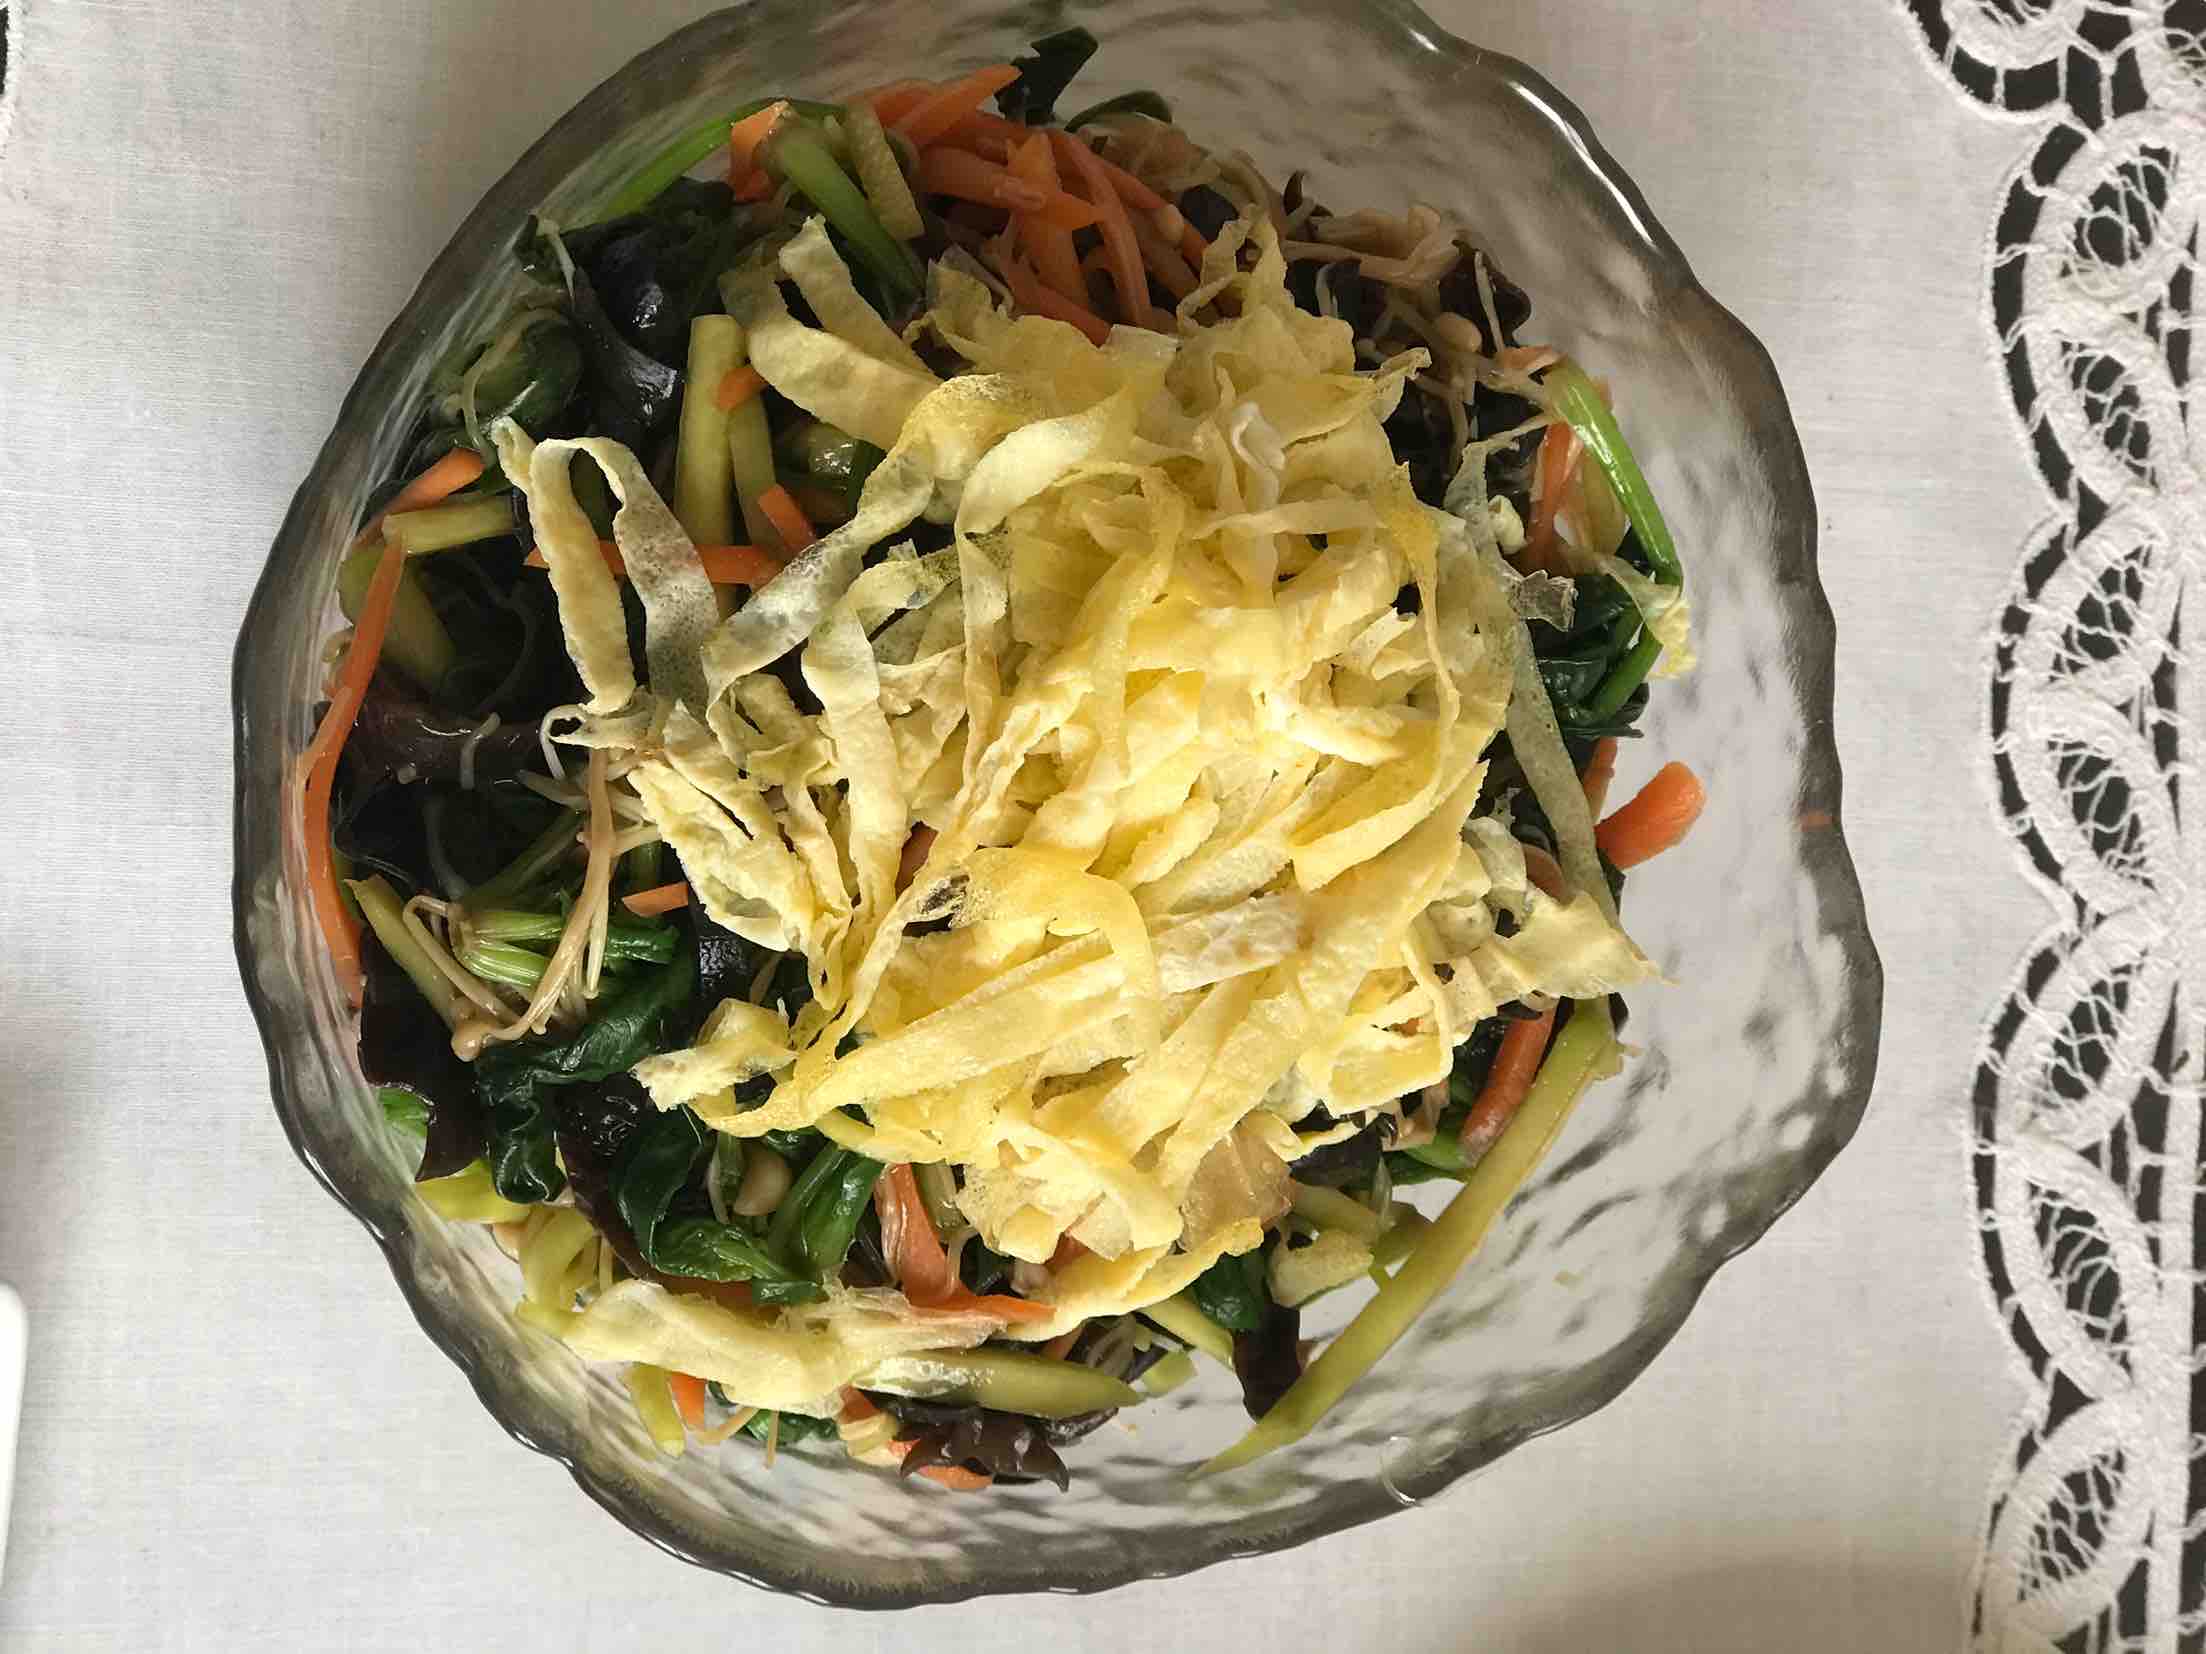 Light, Refreshing, Nutritious and Delicious Coleslaw recipe